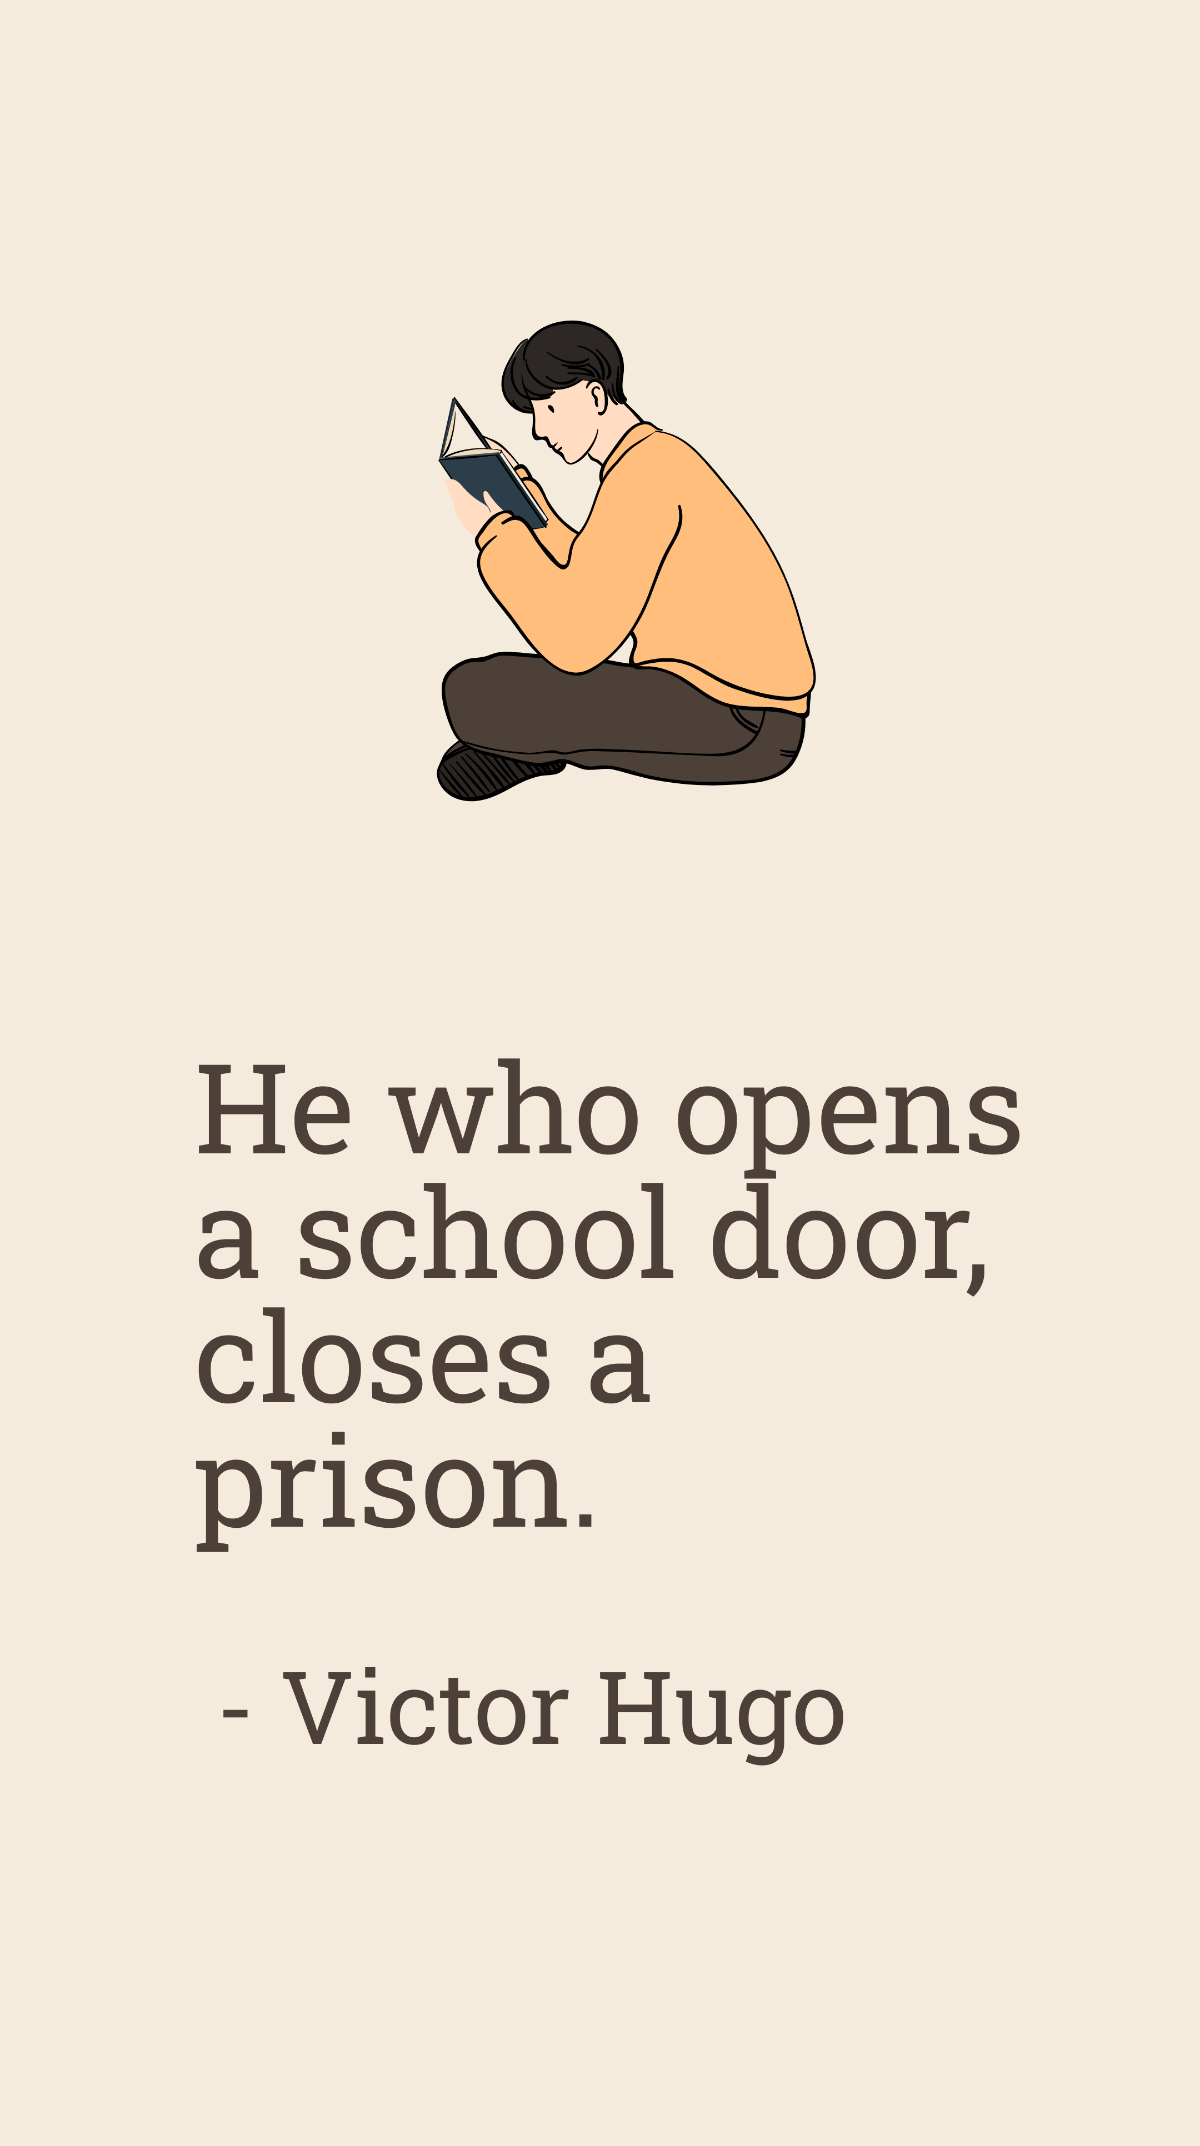 Free Victor Hugo - He who opens a school door, closes a prison. Template